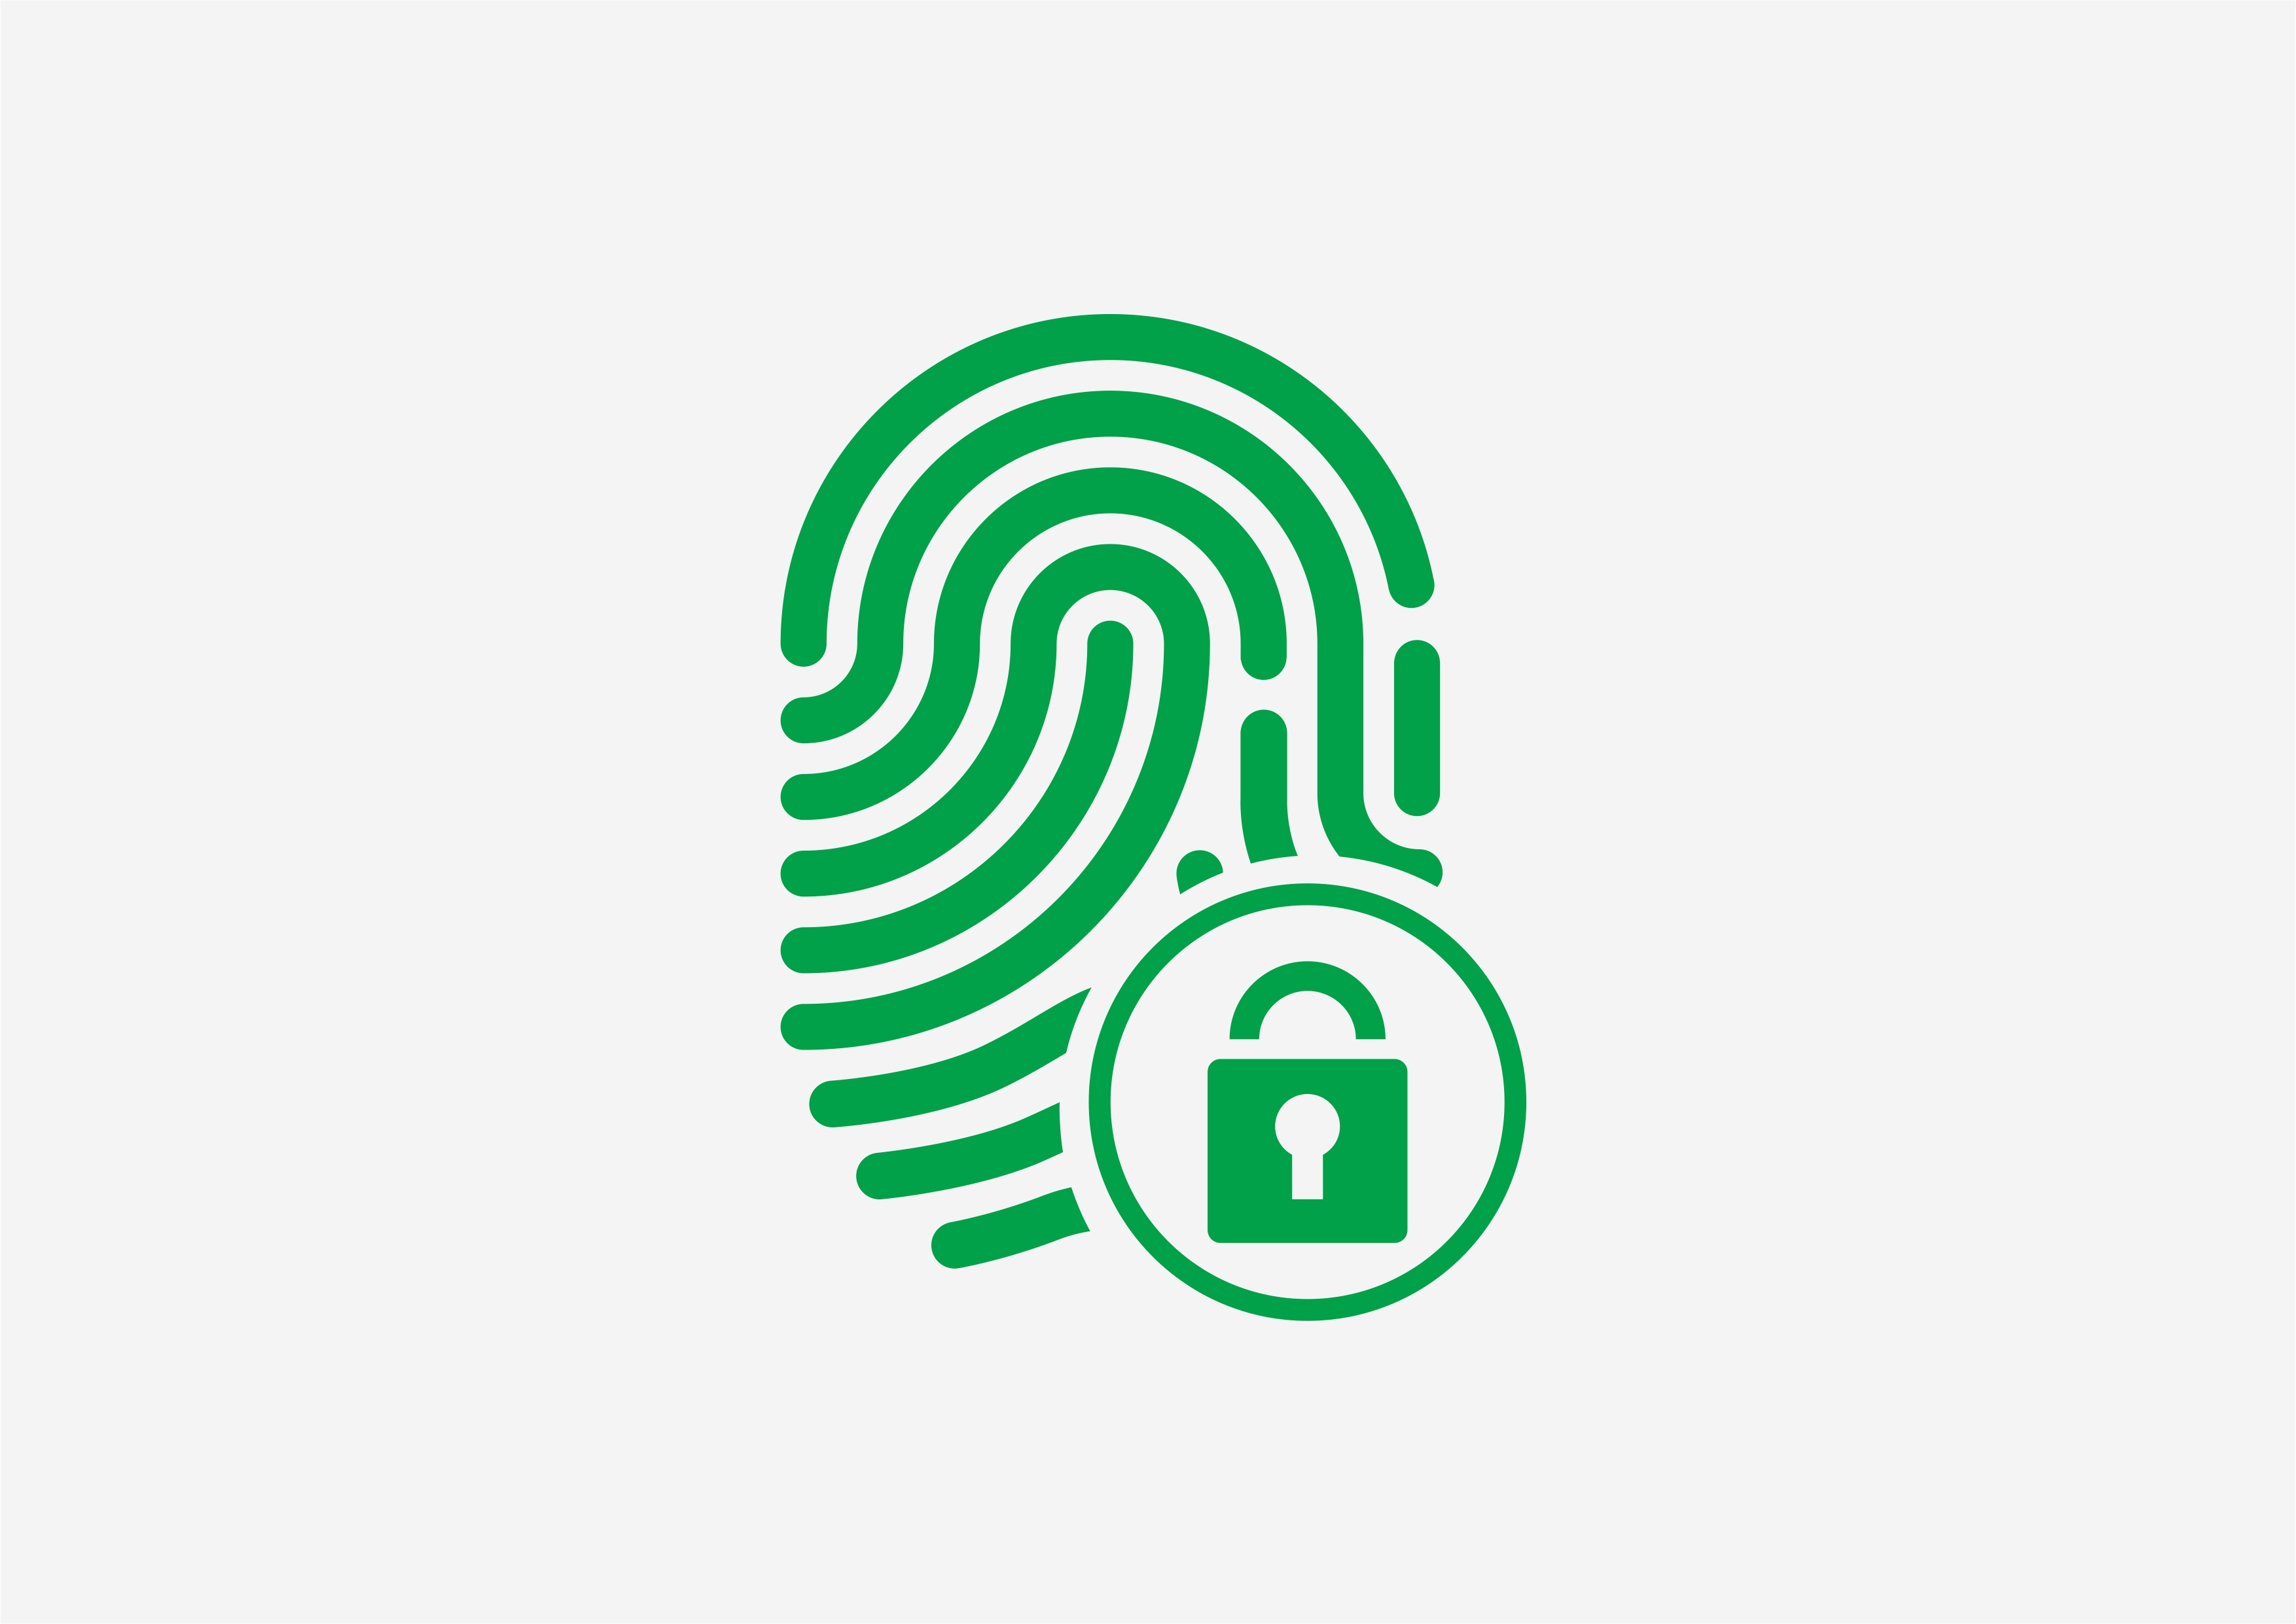 GenKey’s new Biometric BioHASH® SDK supports next-generation protocols for privacy and security